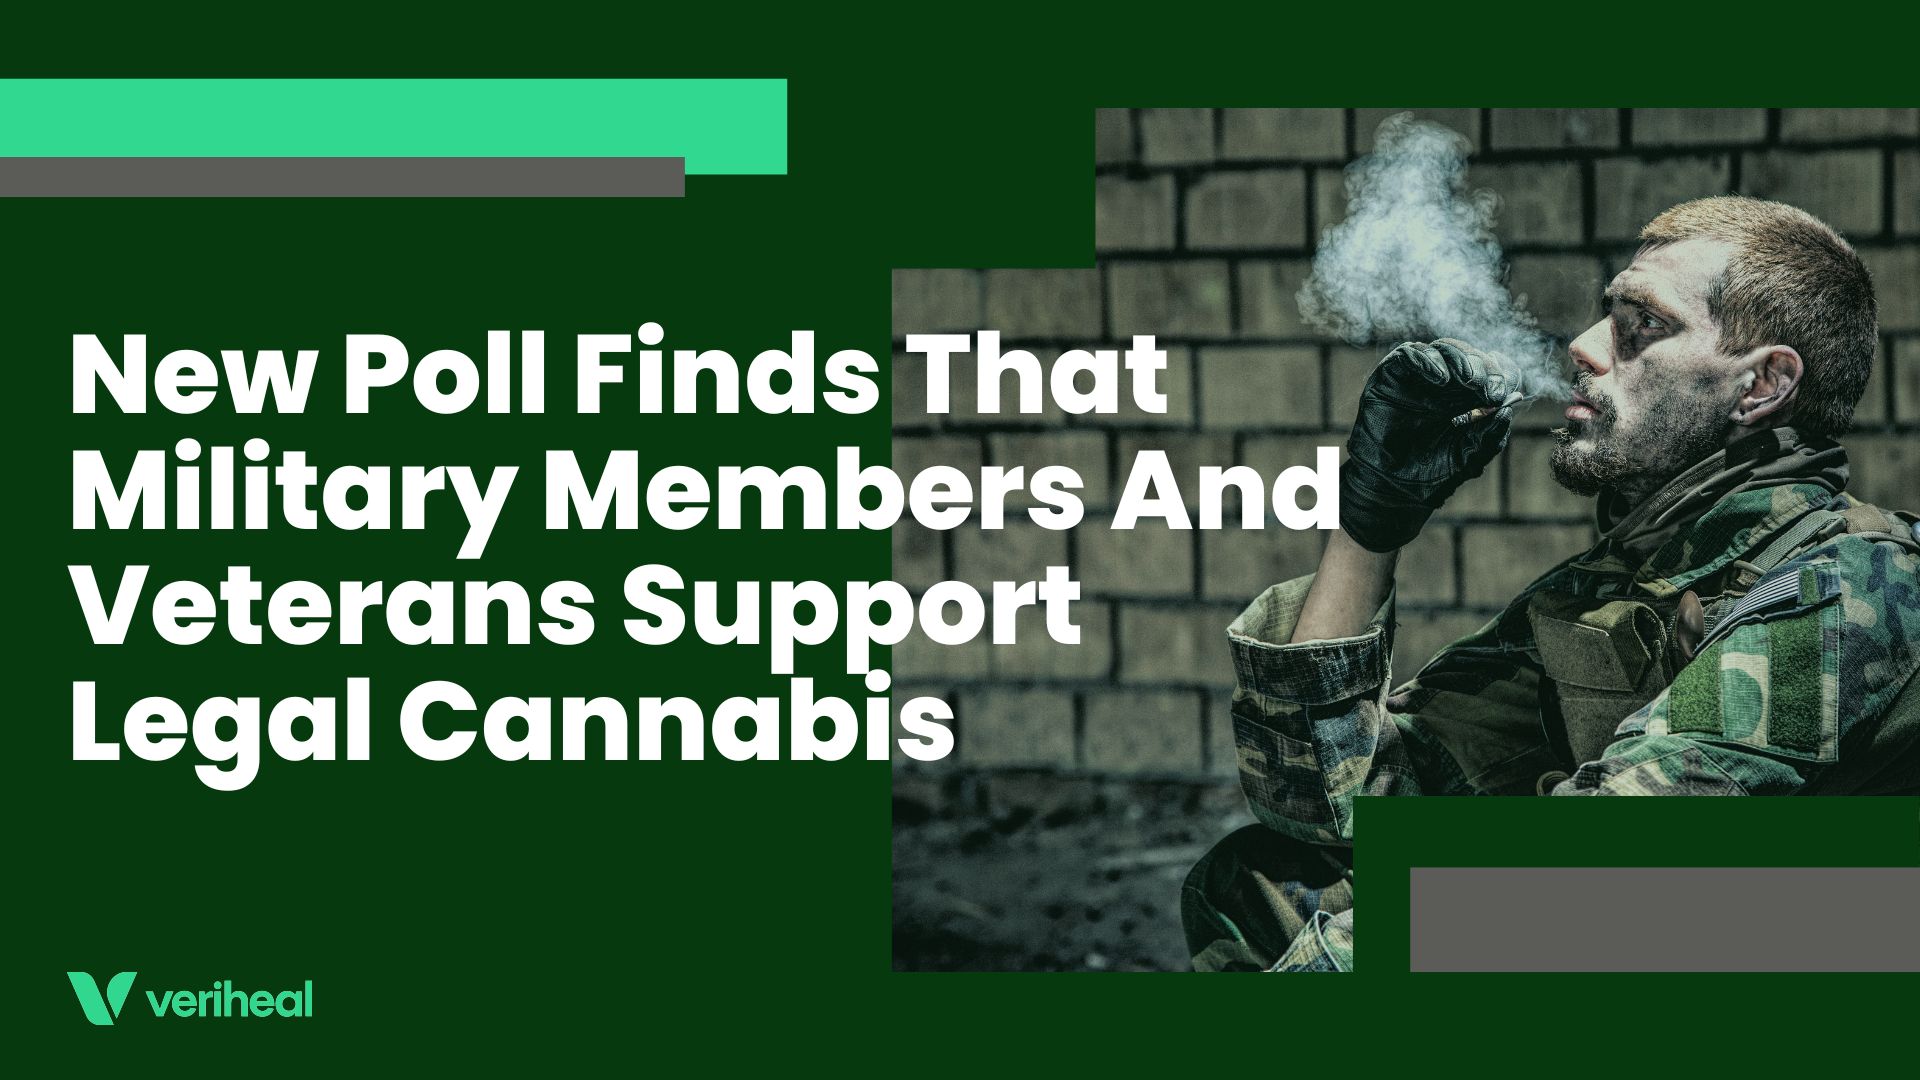 New Poll Finds That Military Members And Veterans Support Legal Cannabis